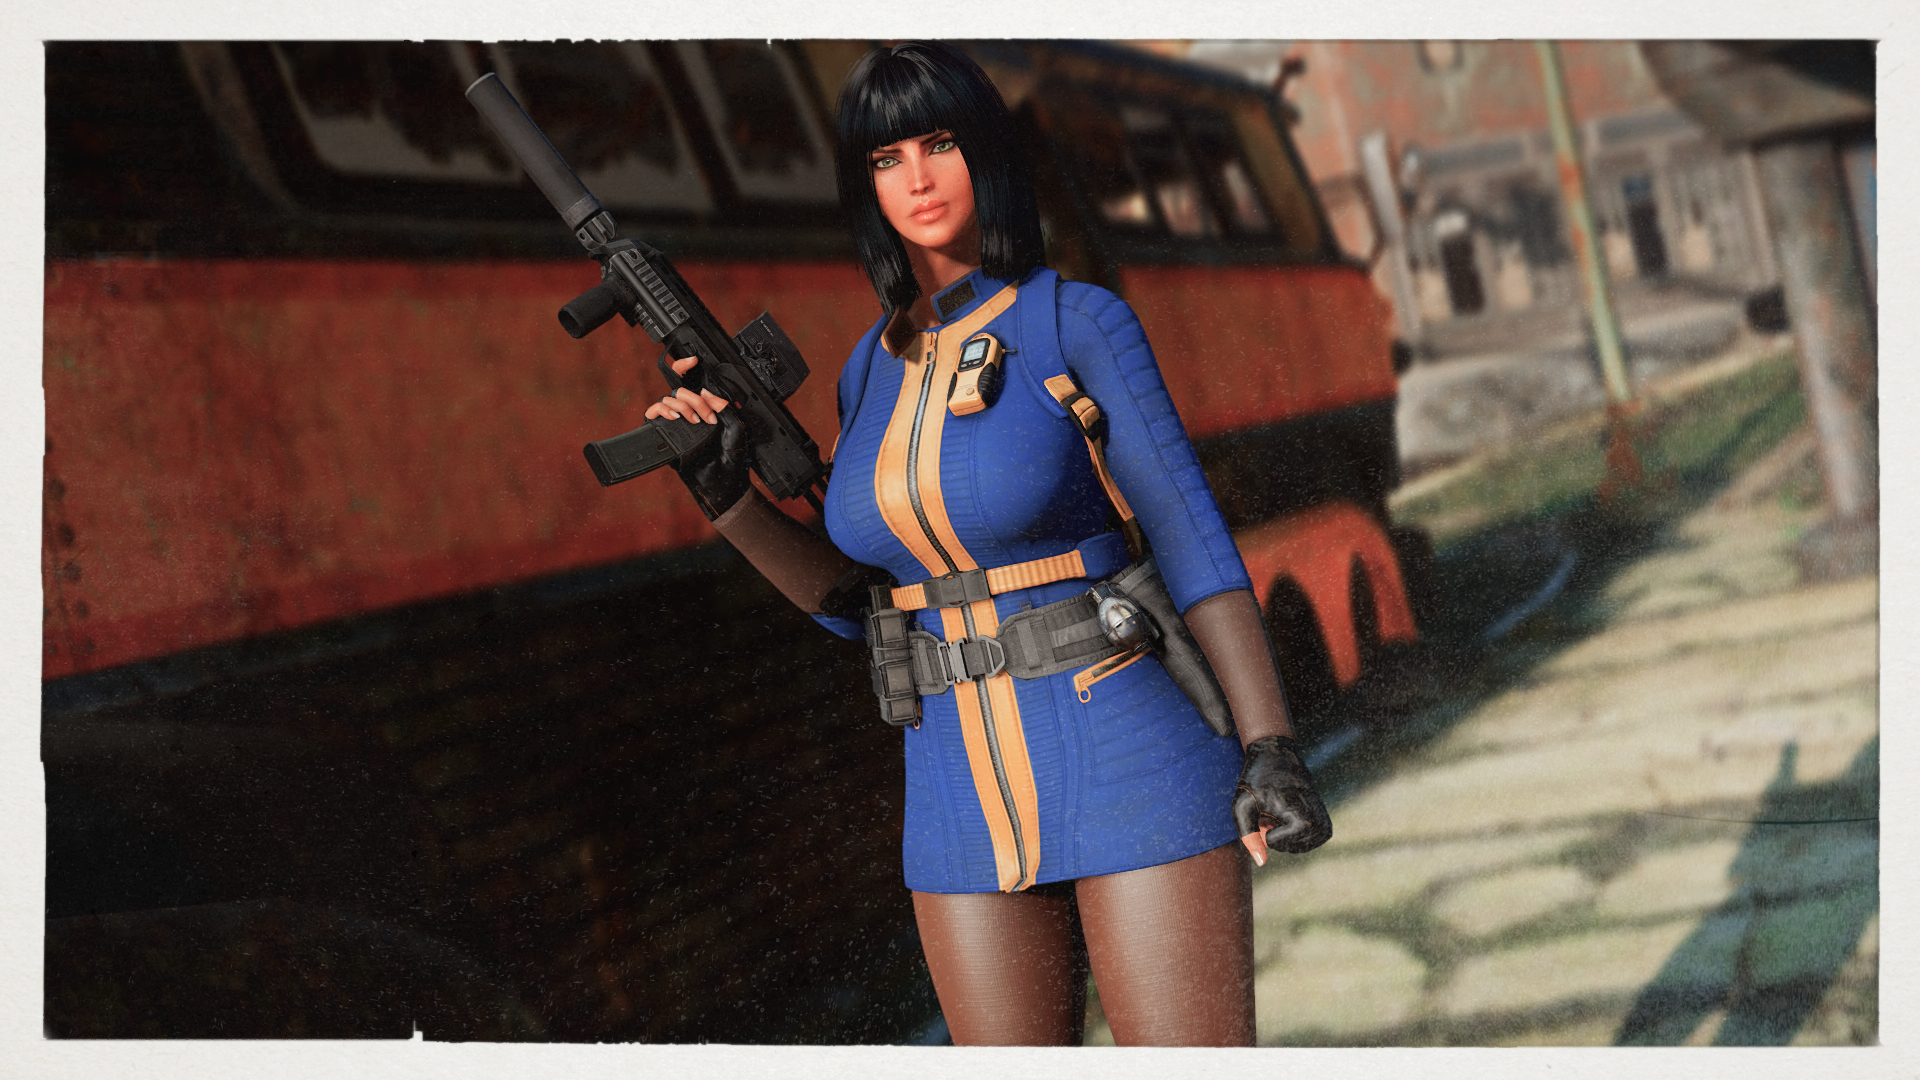 185531932_Fallout42021-07-0819-04-32.png.810c58850f3bc994ae4be03ef698cbcd.png